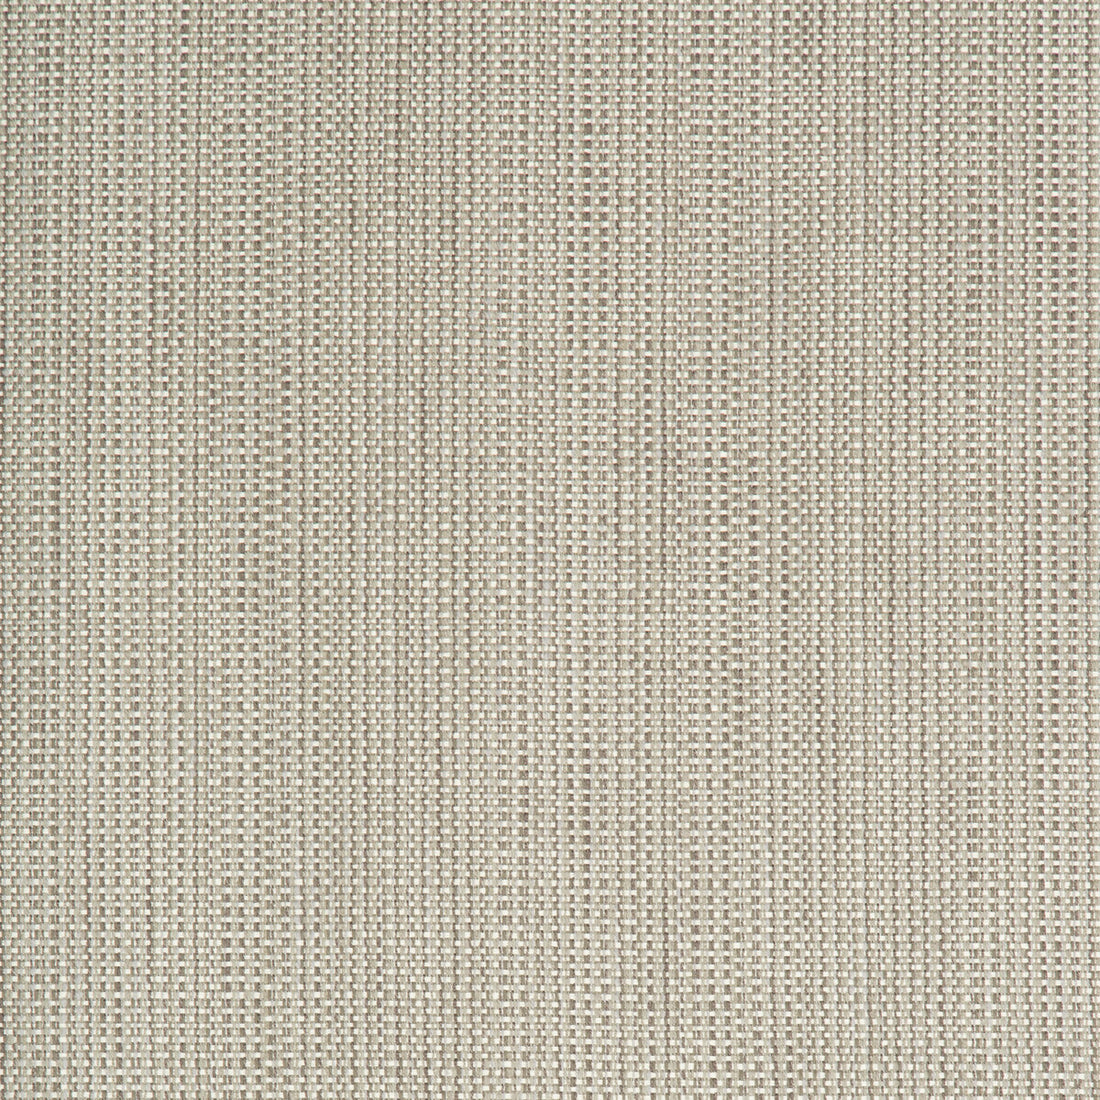 Kravet Smart fabric in 34627-11 color - pattern 34627.11.0 - by Kravet Smart in the Performance Crypton Home collection